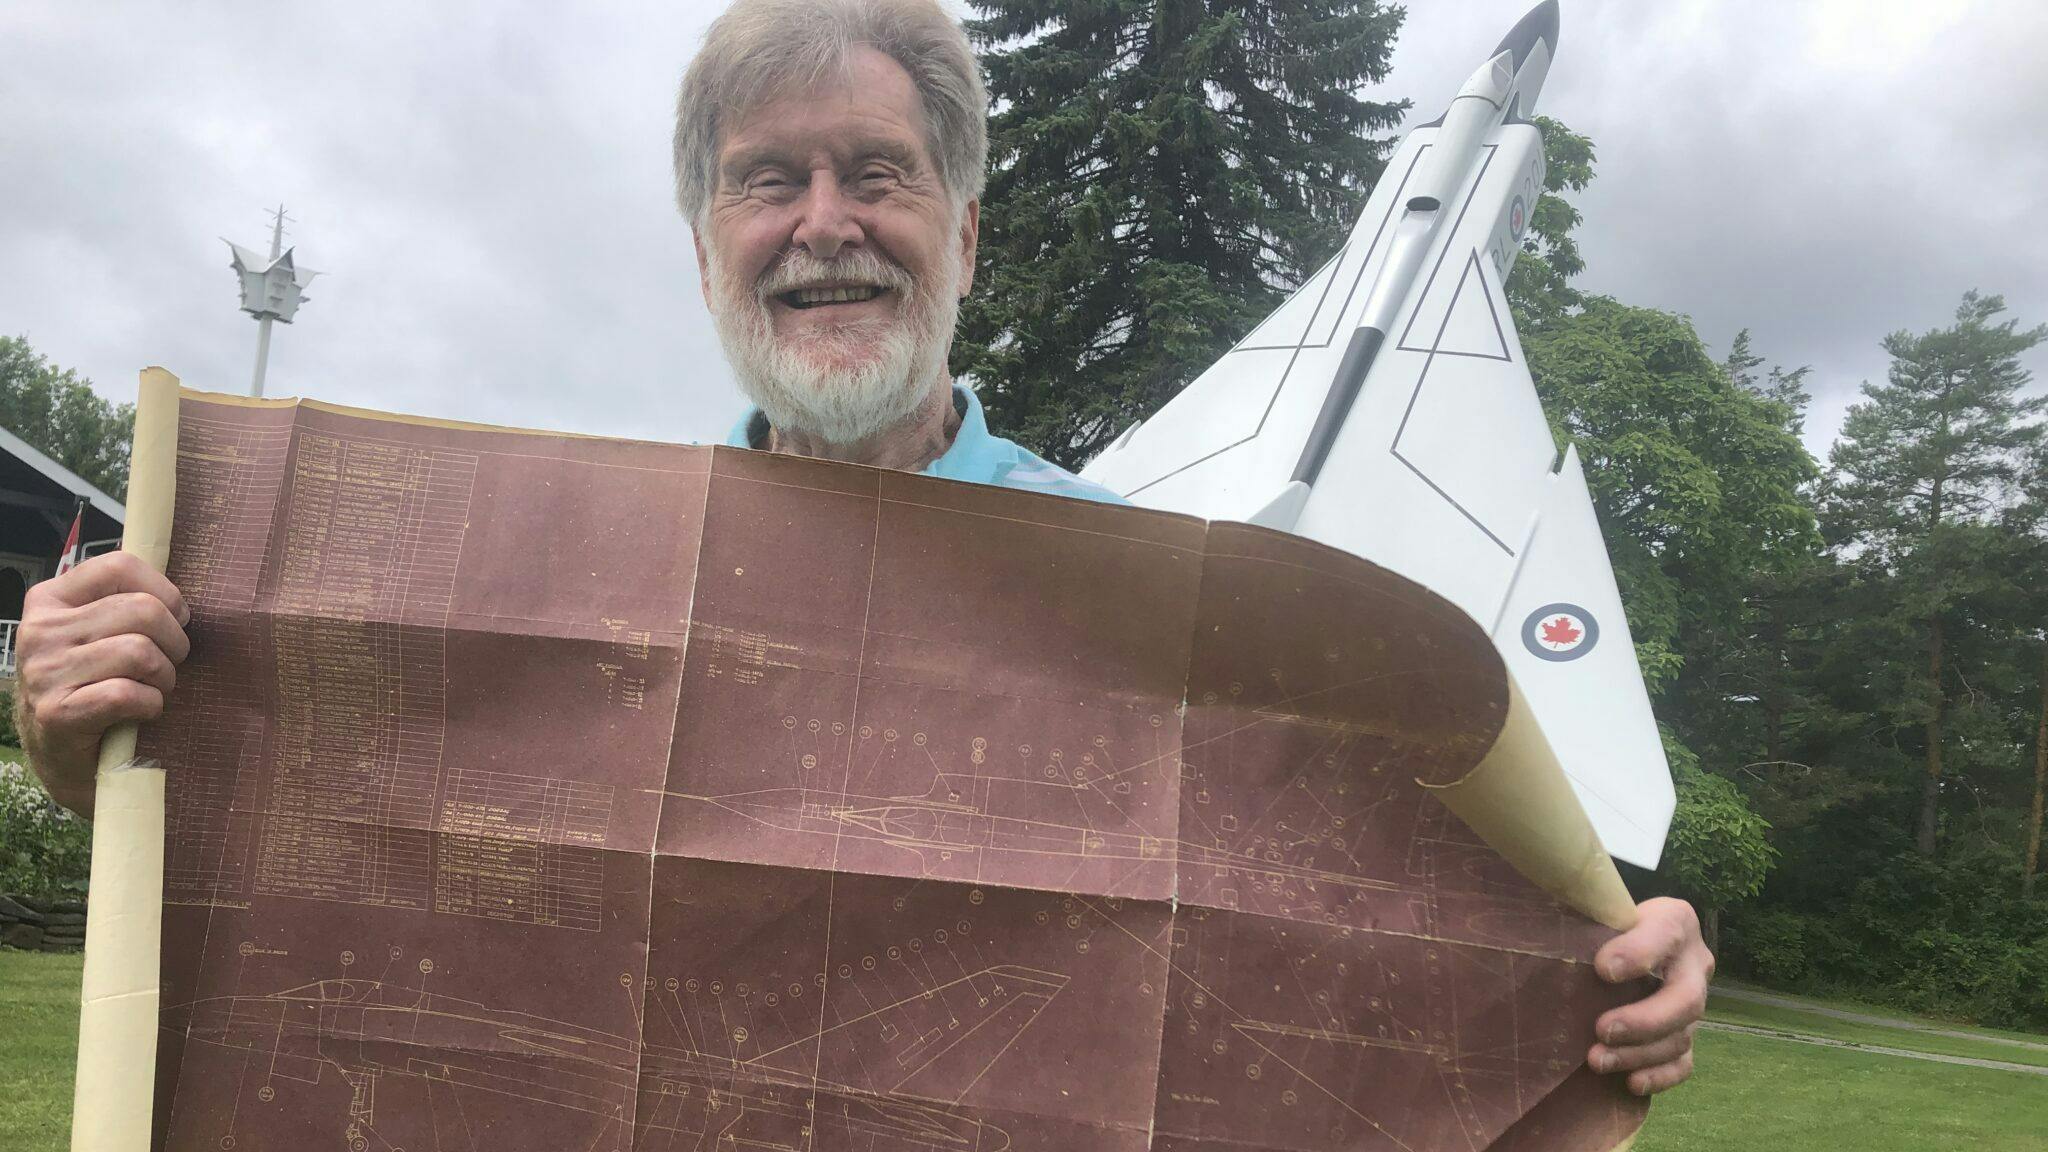 <p>FOUND- Cameron Price of the Arrow 206 group shows off a Avro blueprint of the iconic Arrow aircraft located in Picton in the collection of late Avro employee William Calver. (Jason Parks/Gazette Staff)</p>
